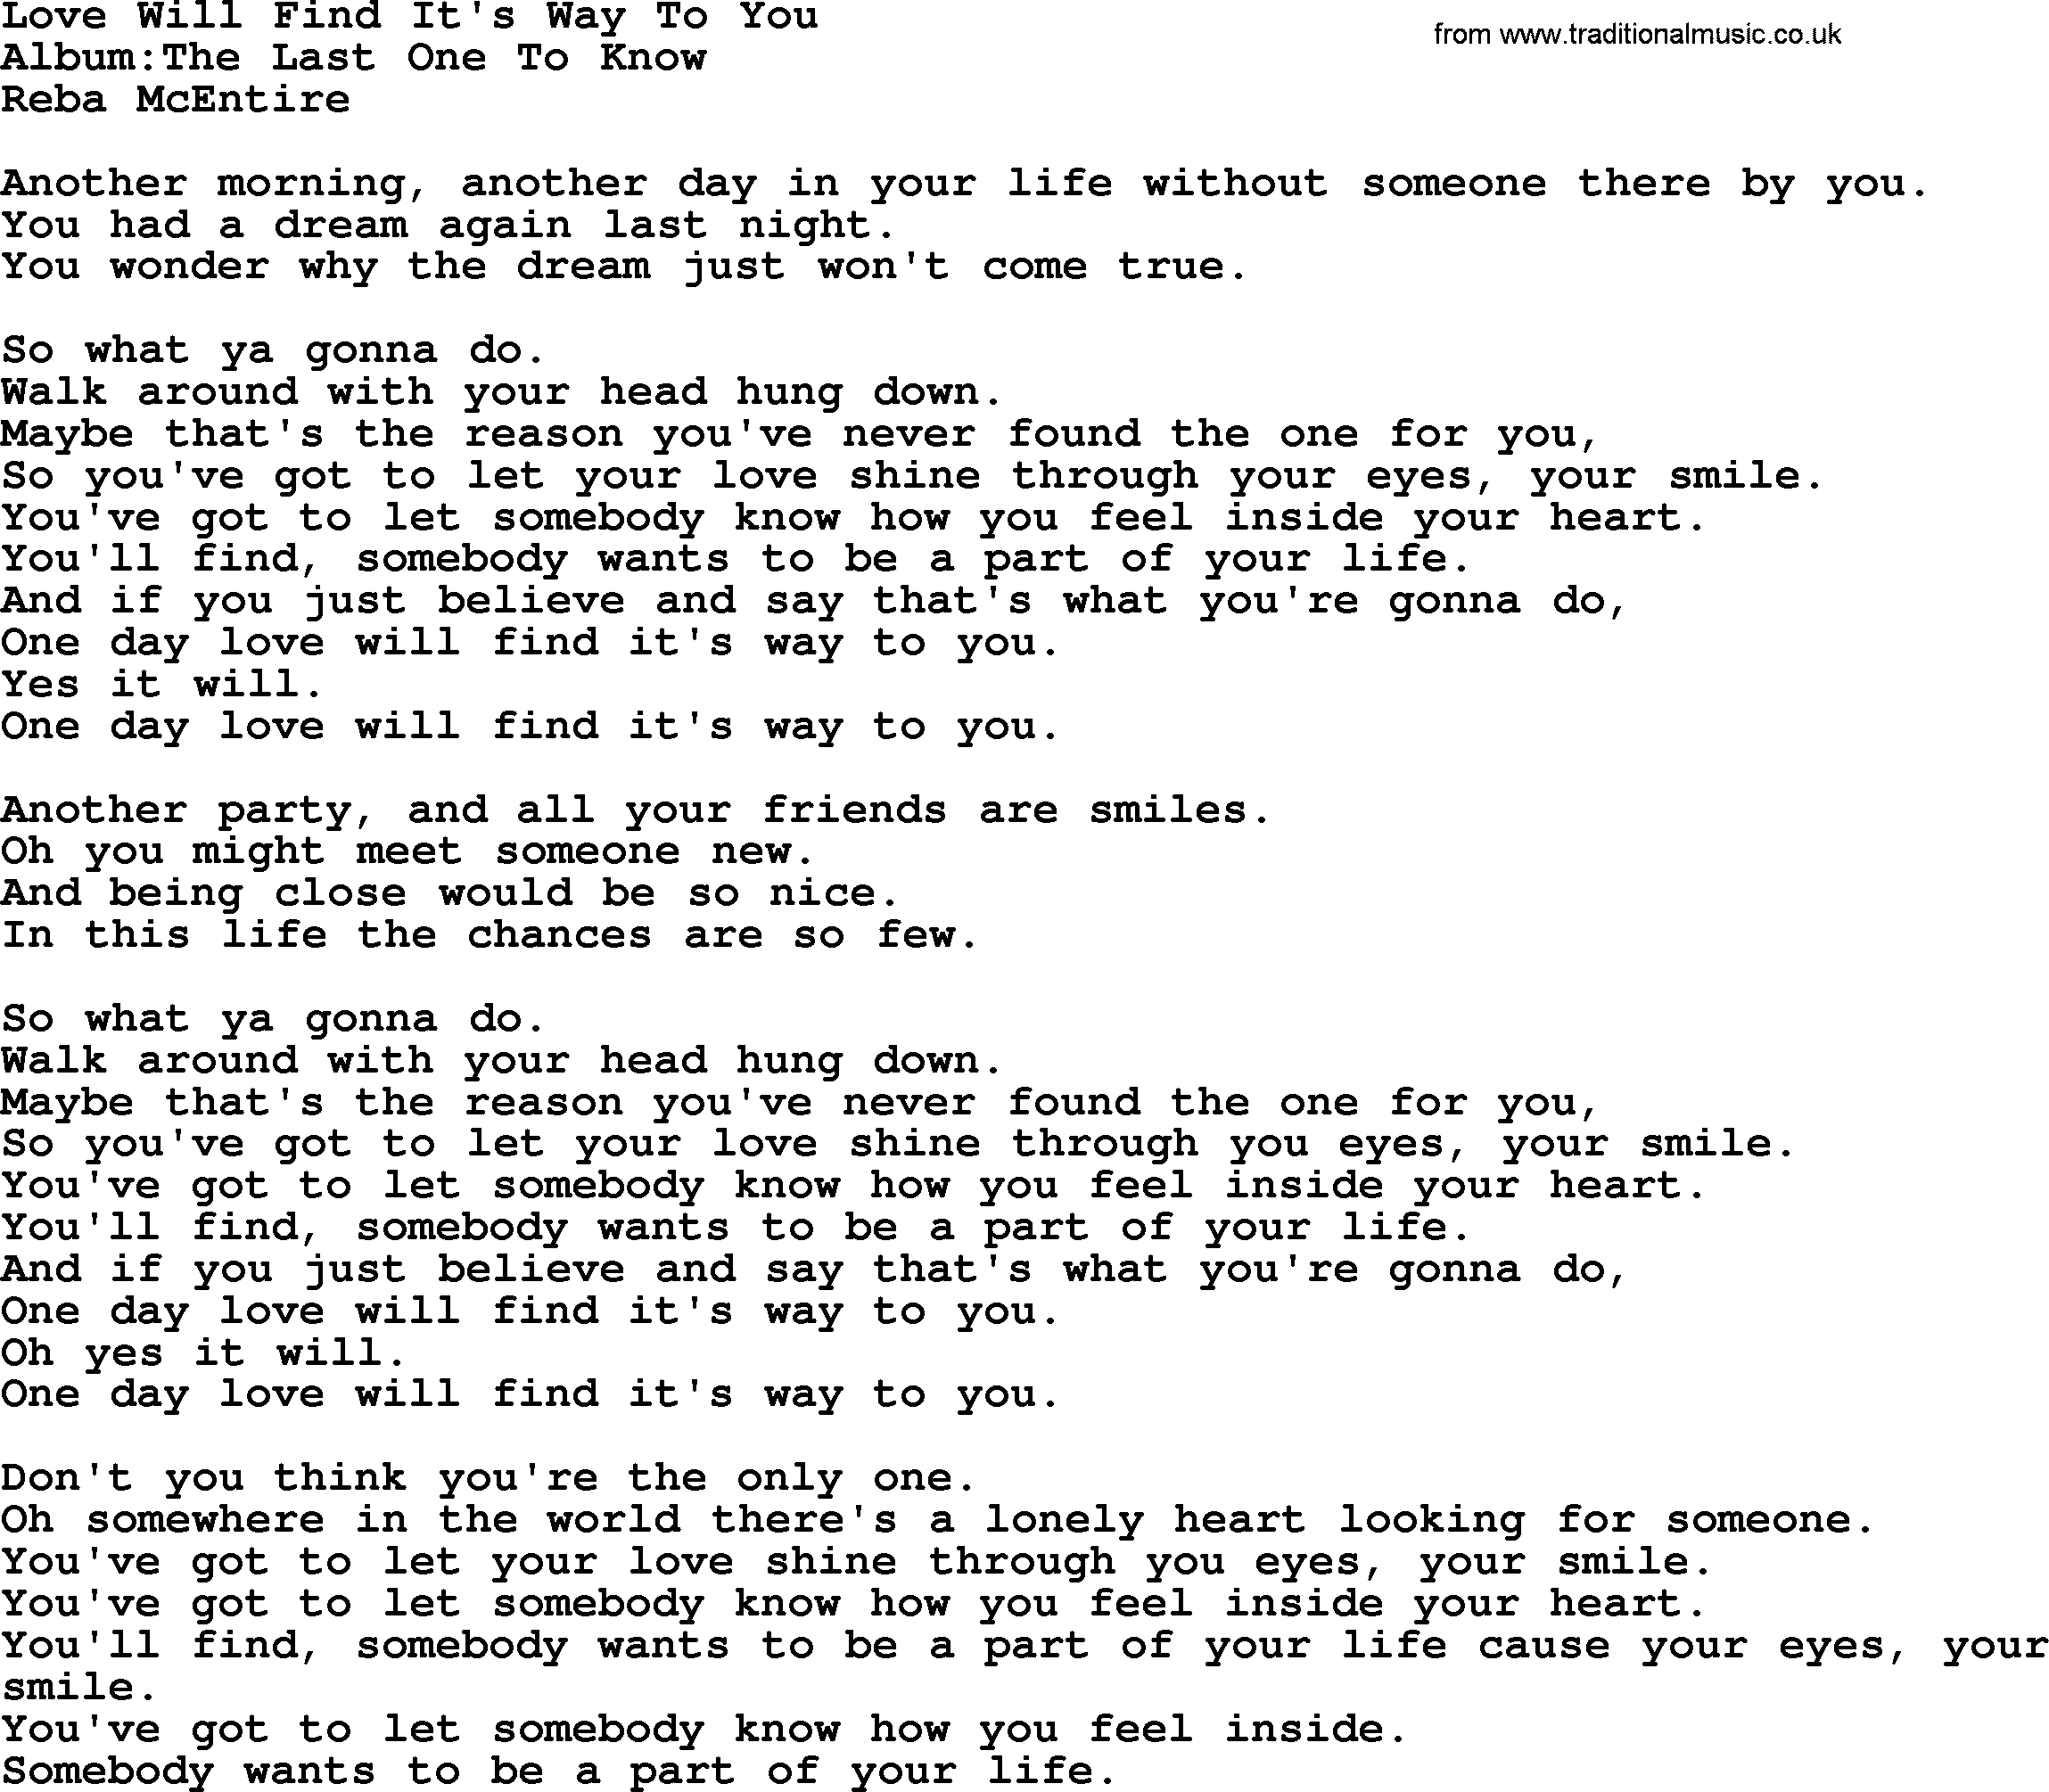 Reba McEntire song: Love Will Find It's Way To You lyrics